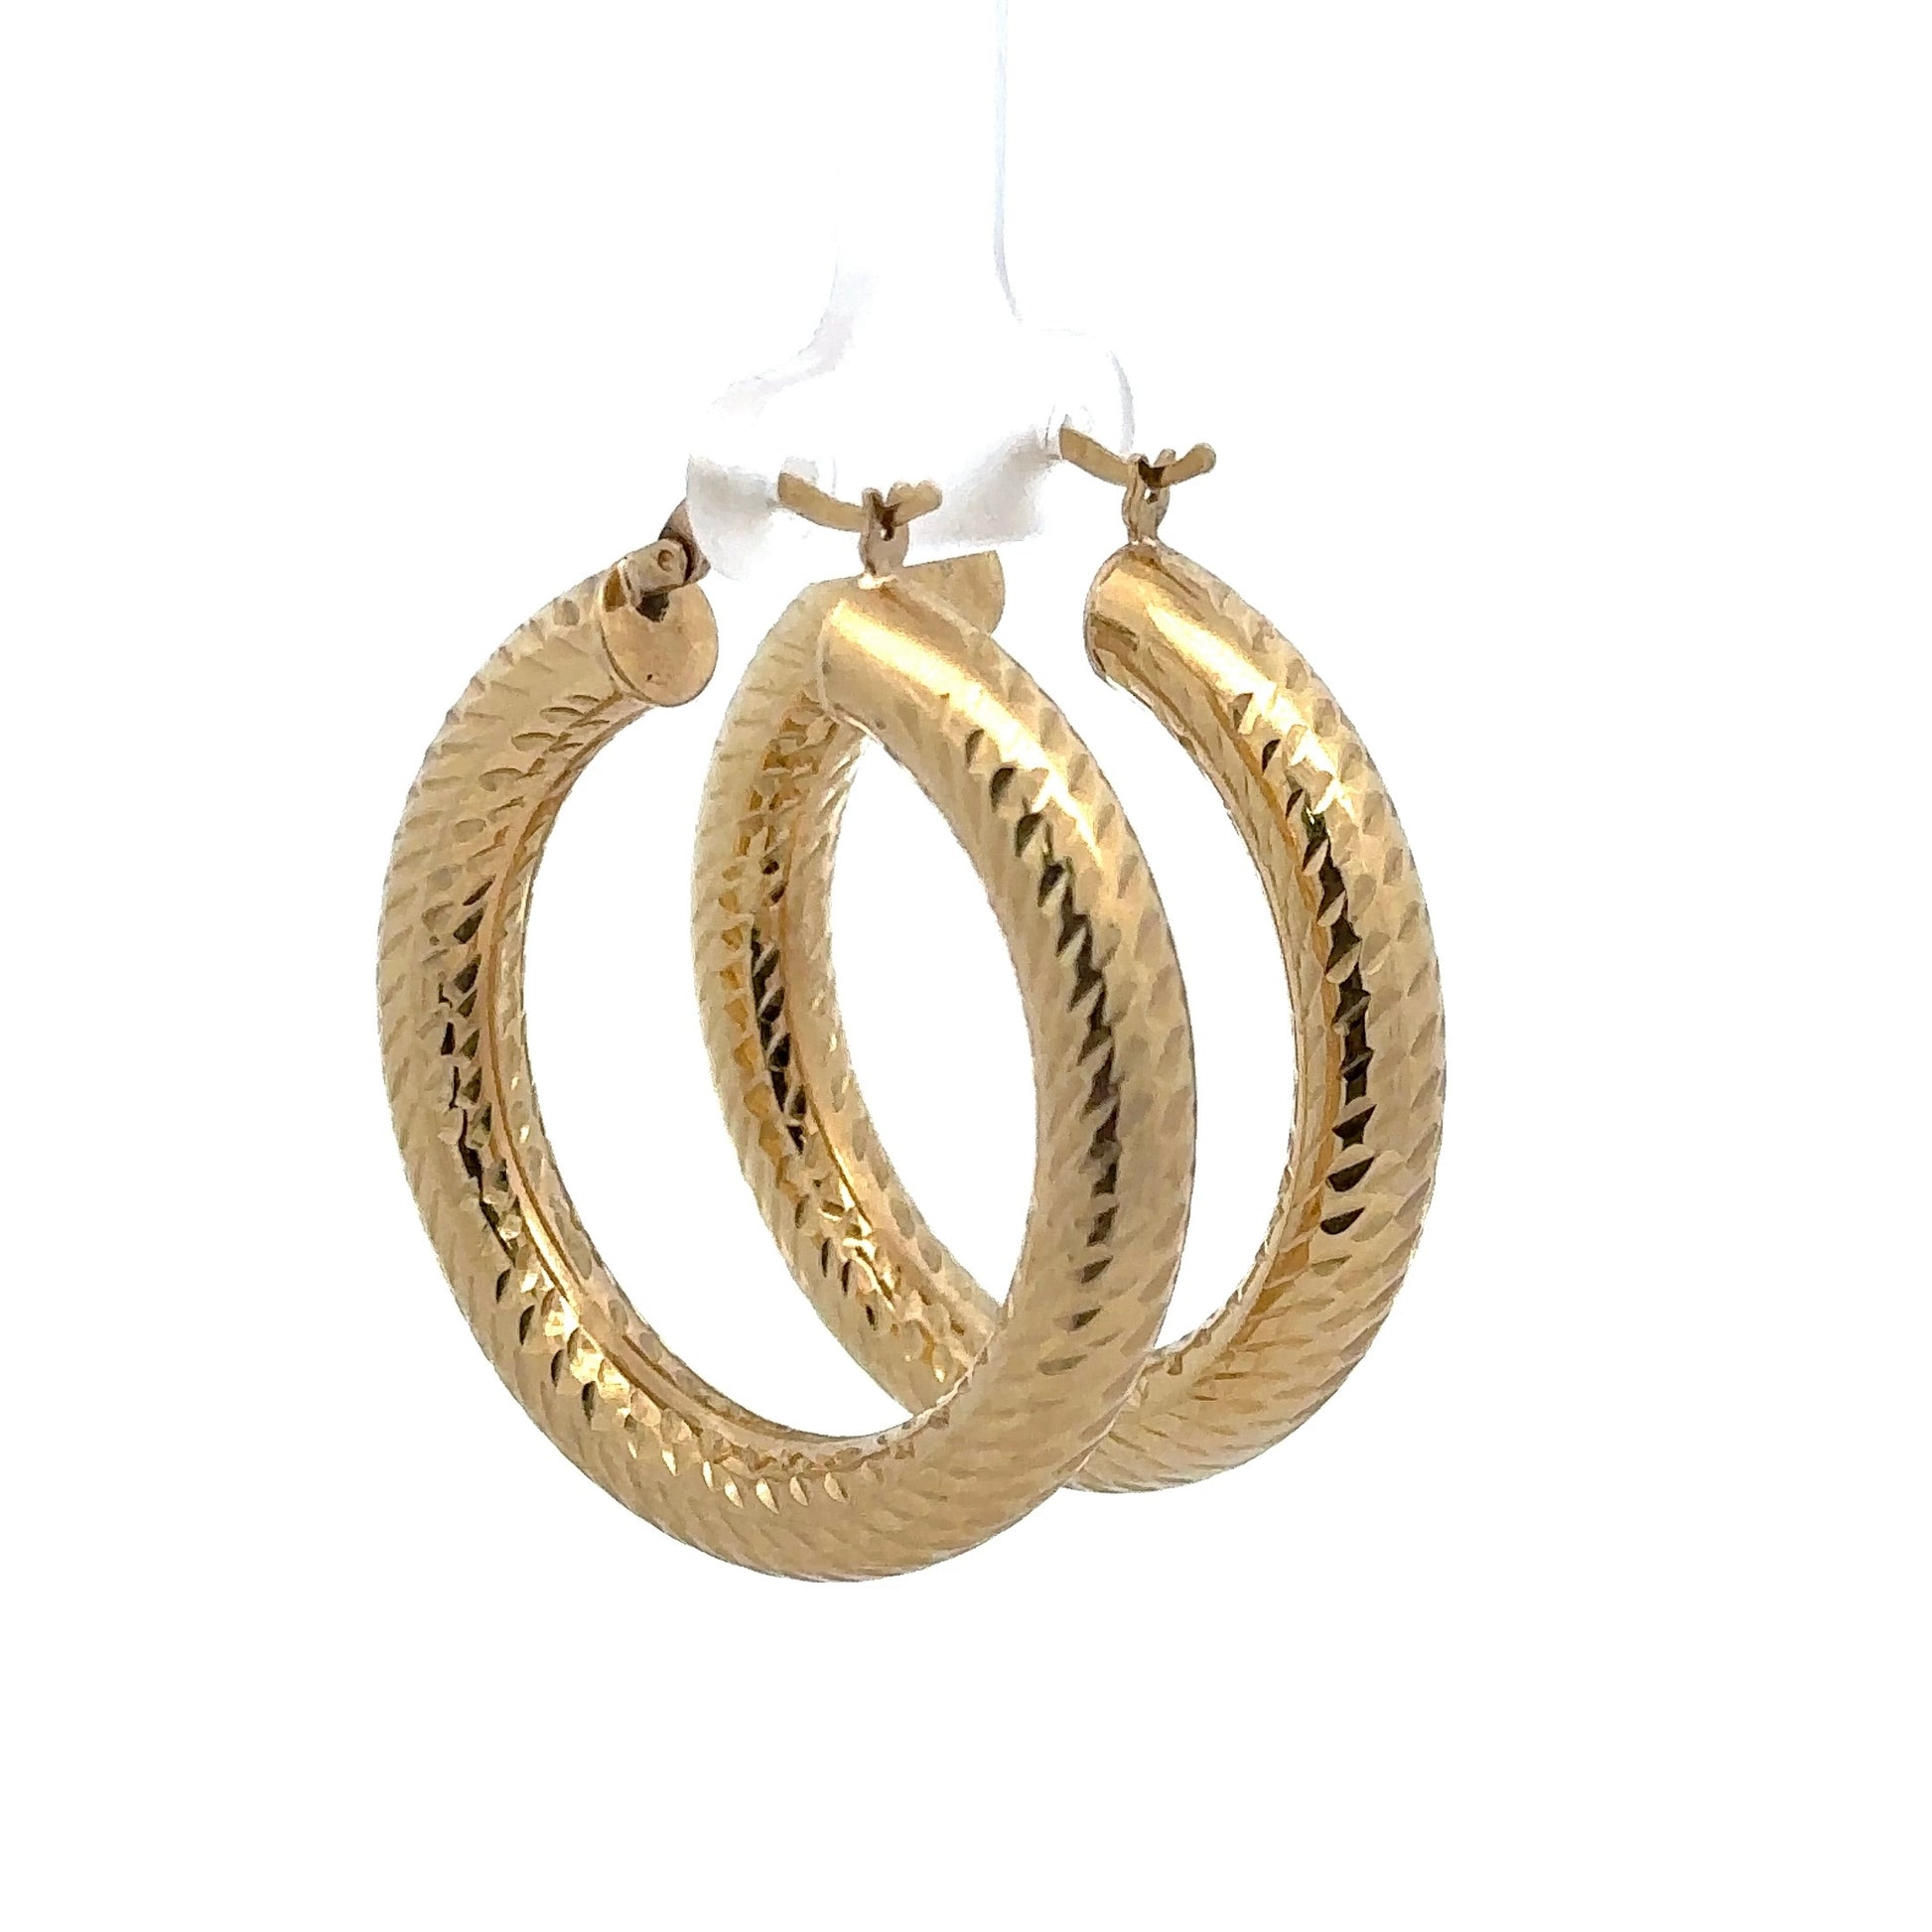 Diagonal back of yellow gold textured hoops.